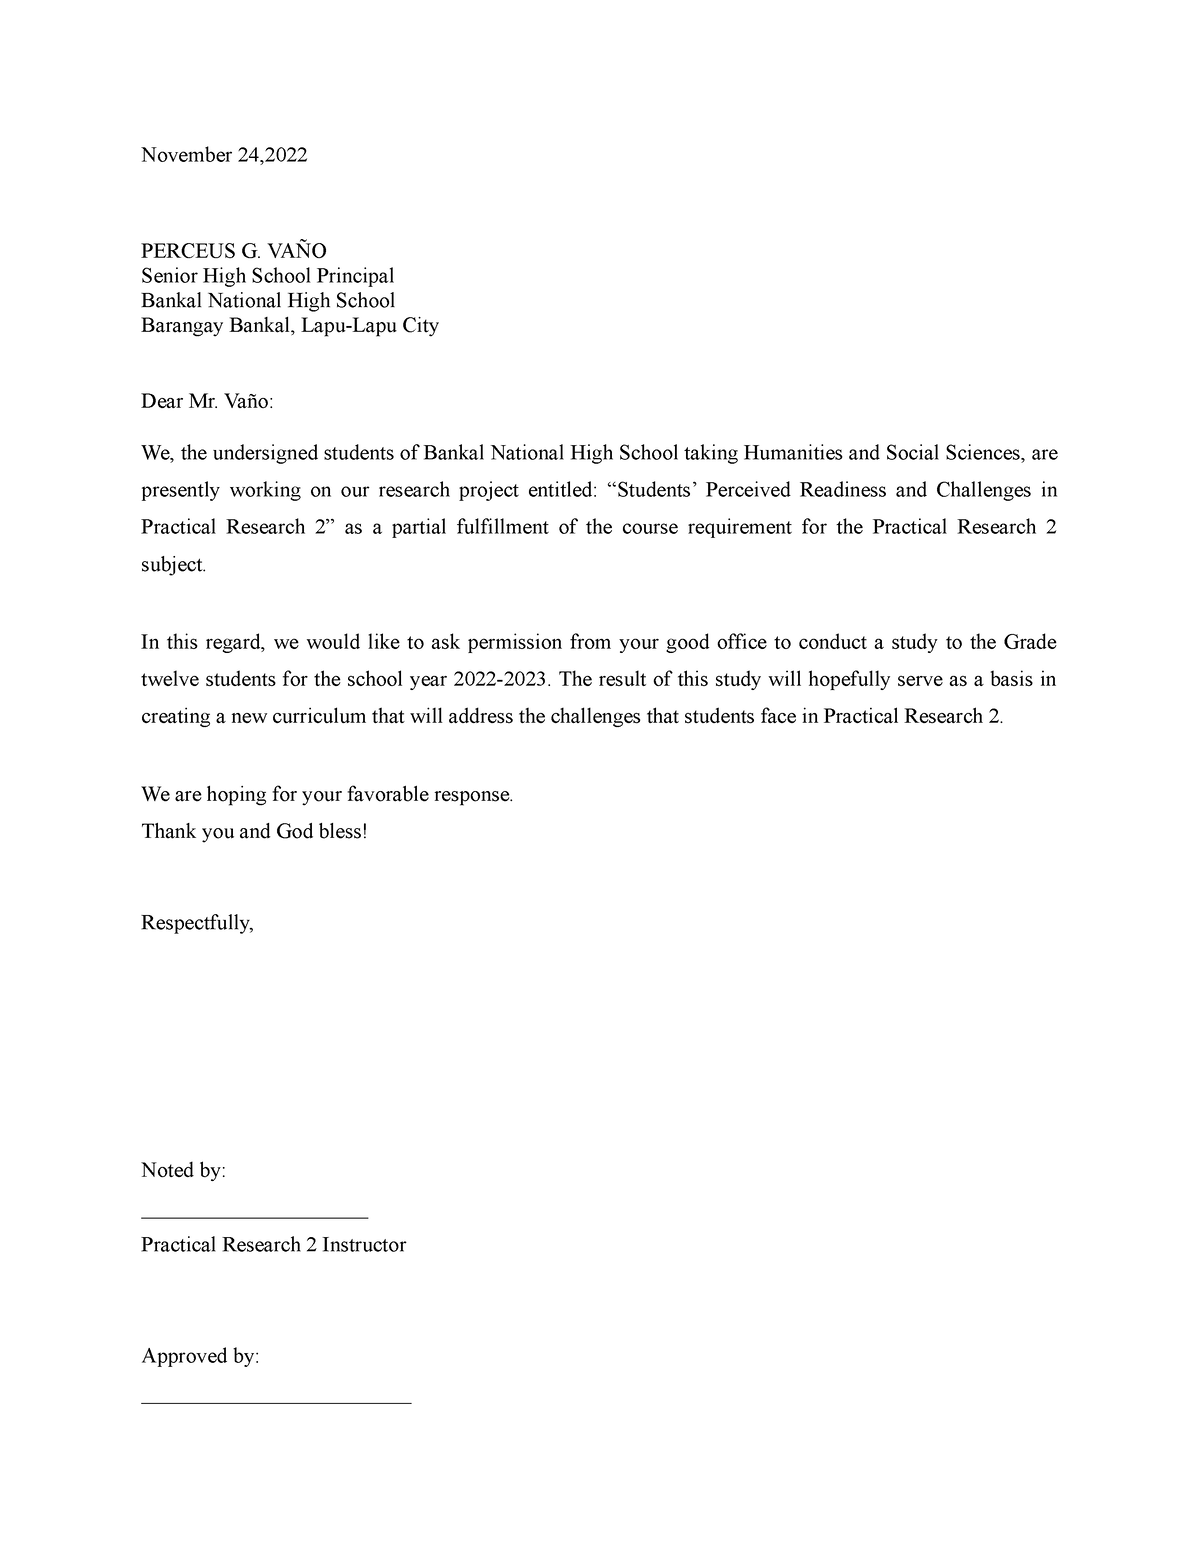 Letter OF Permission TO THE School Principal - November 24, PERCEUS G ...